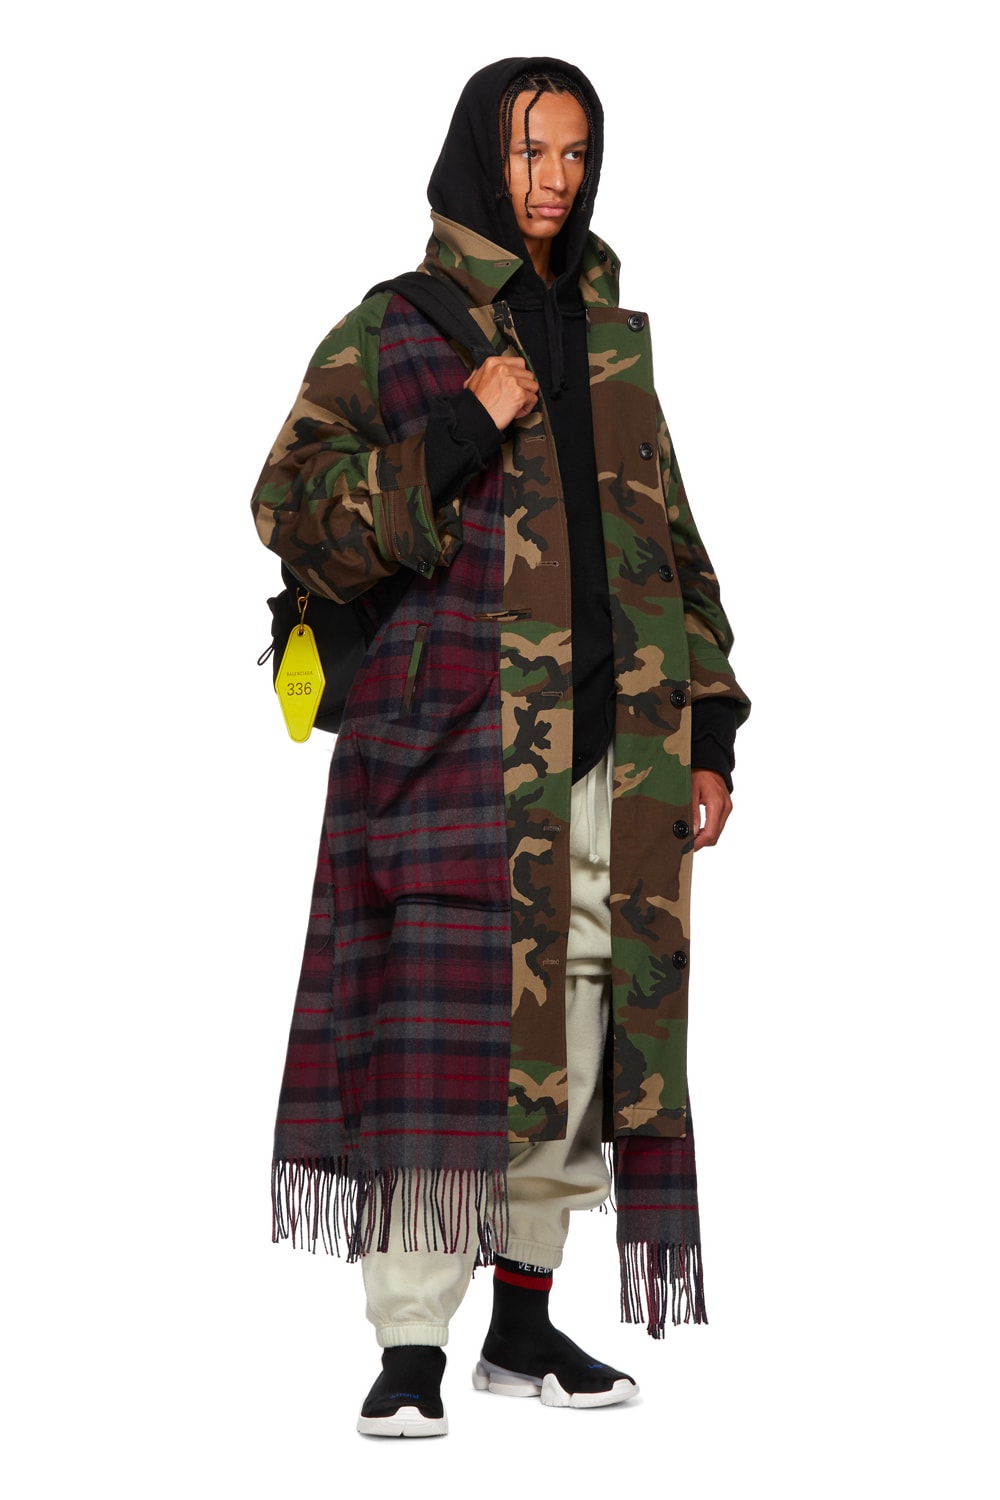 Vetements Fall Winter 2018 Camo Scarf Trench Coat plaid release info jackets military